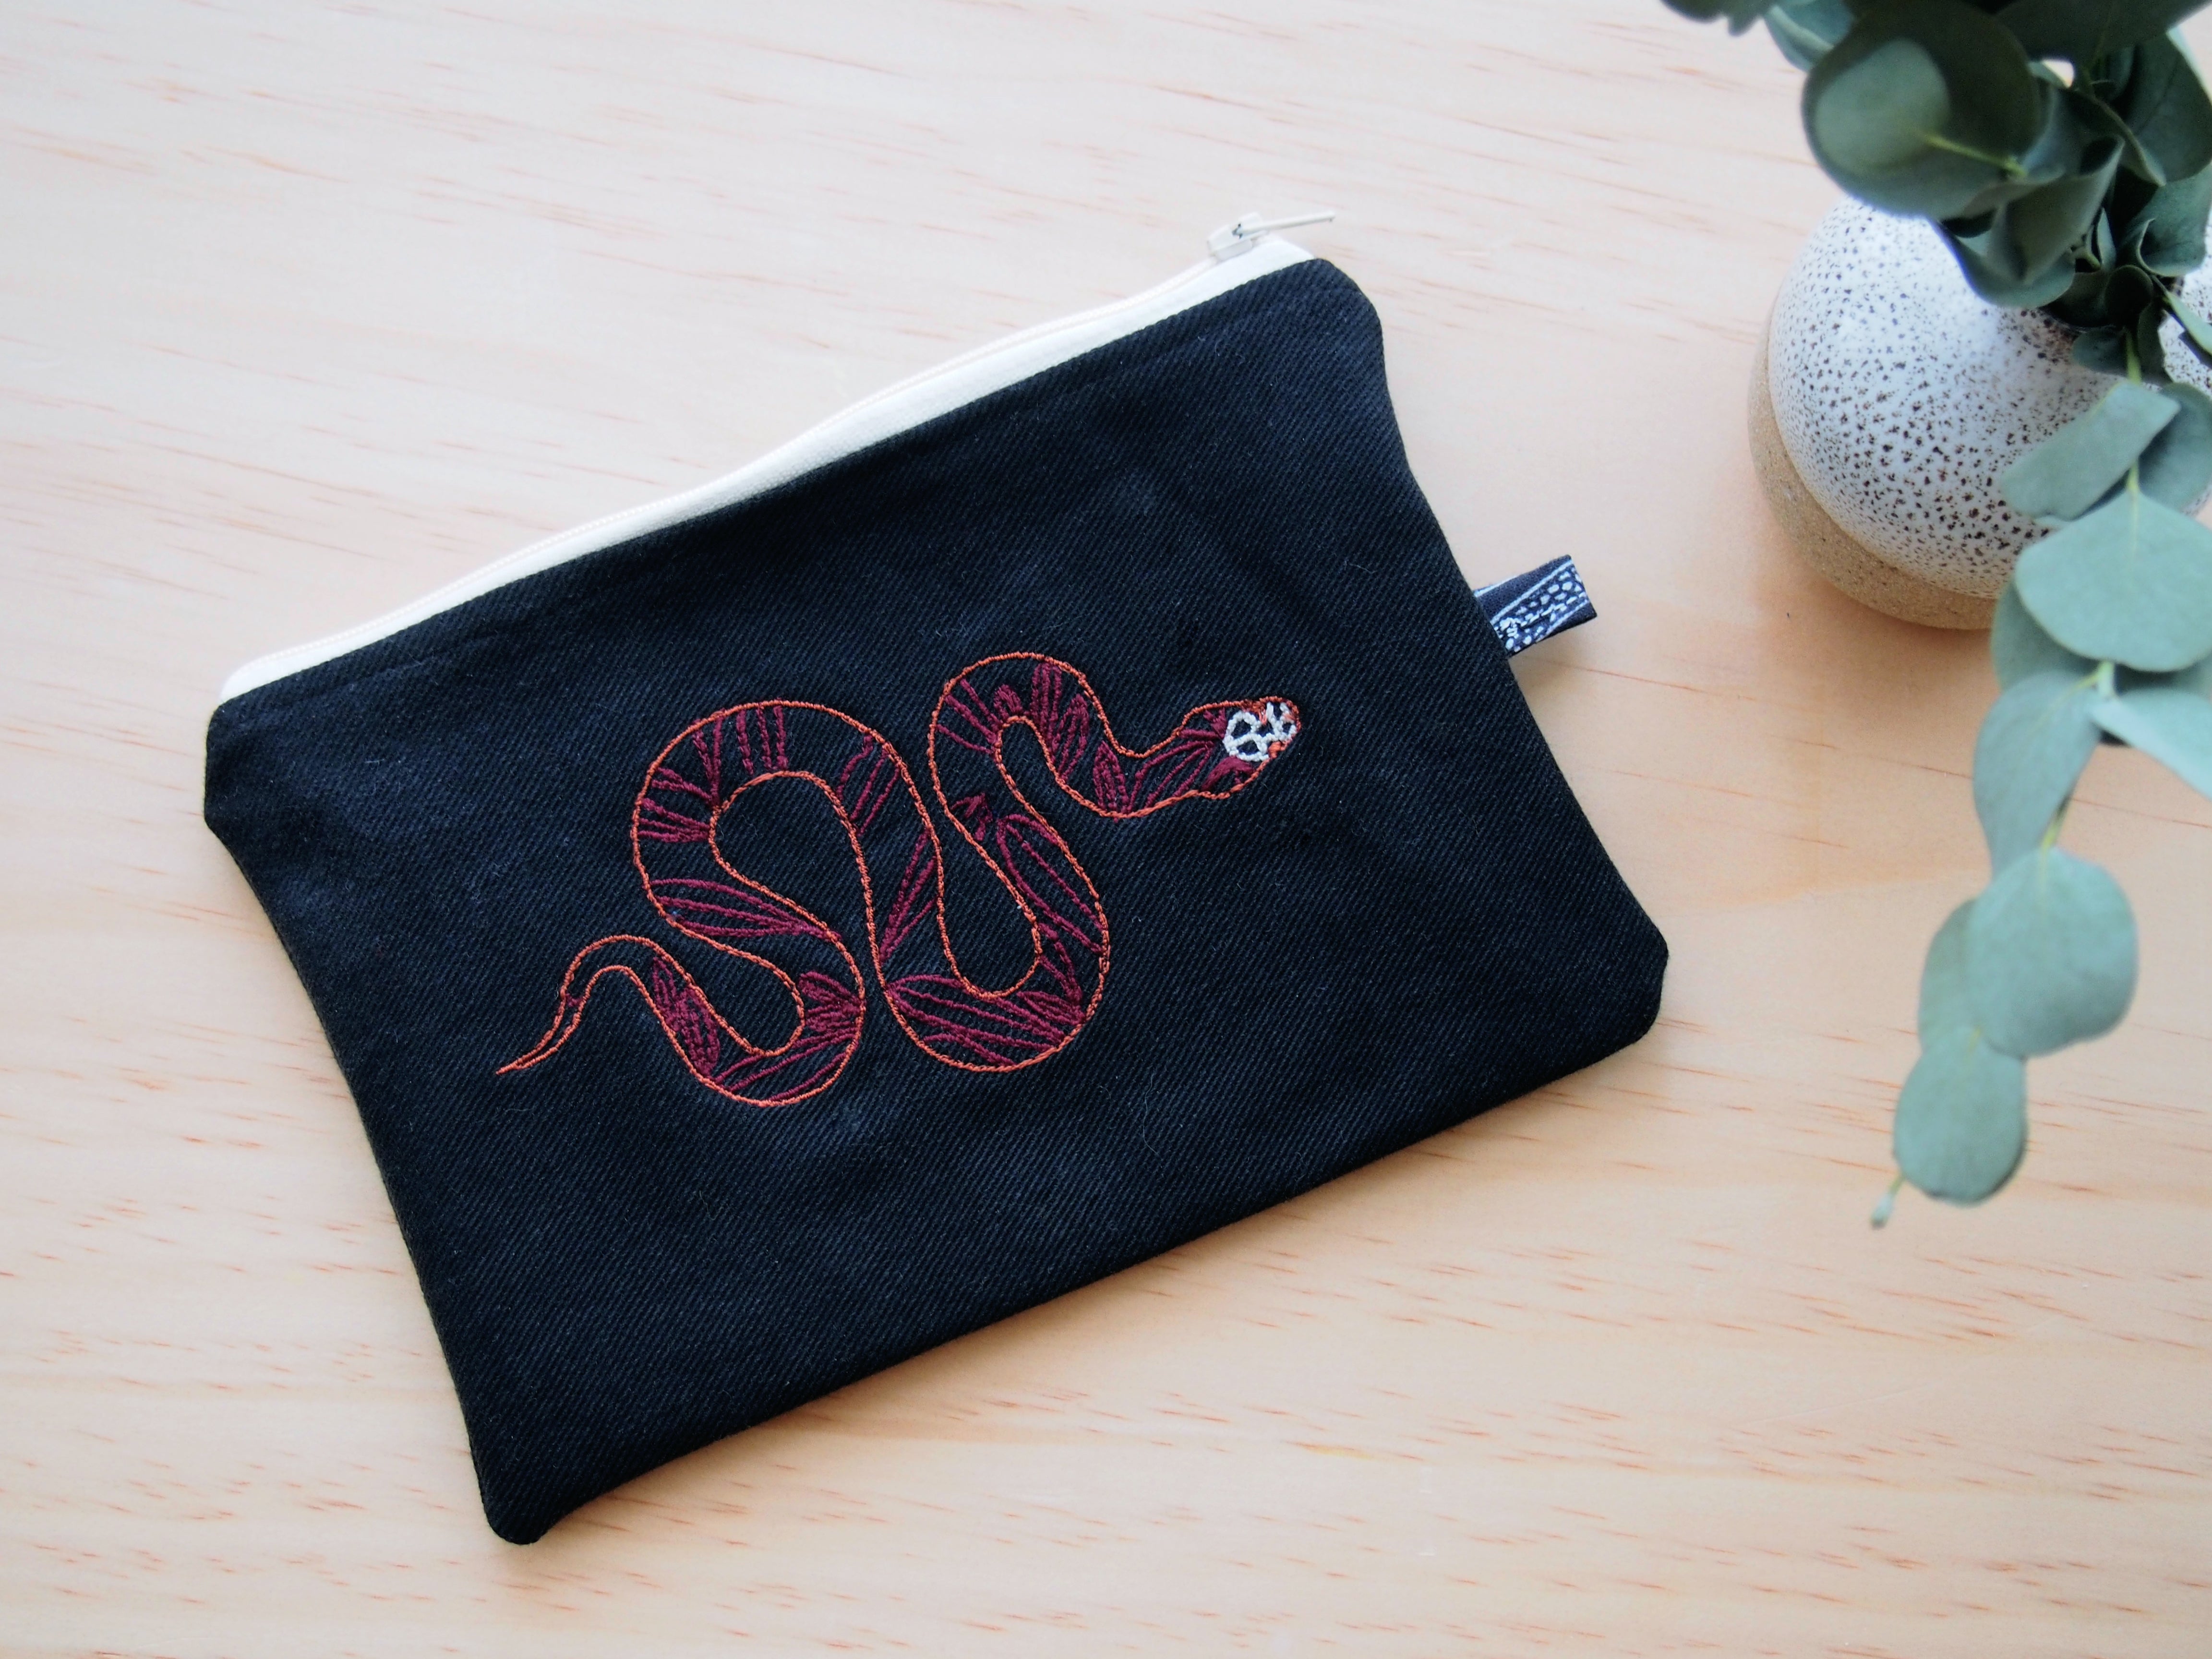 Upcycled Snake pouch